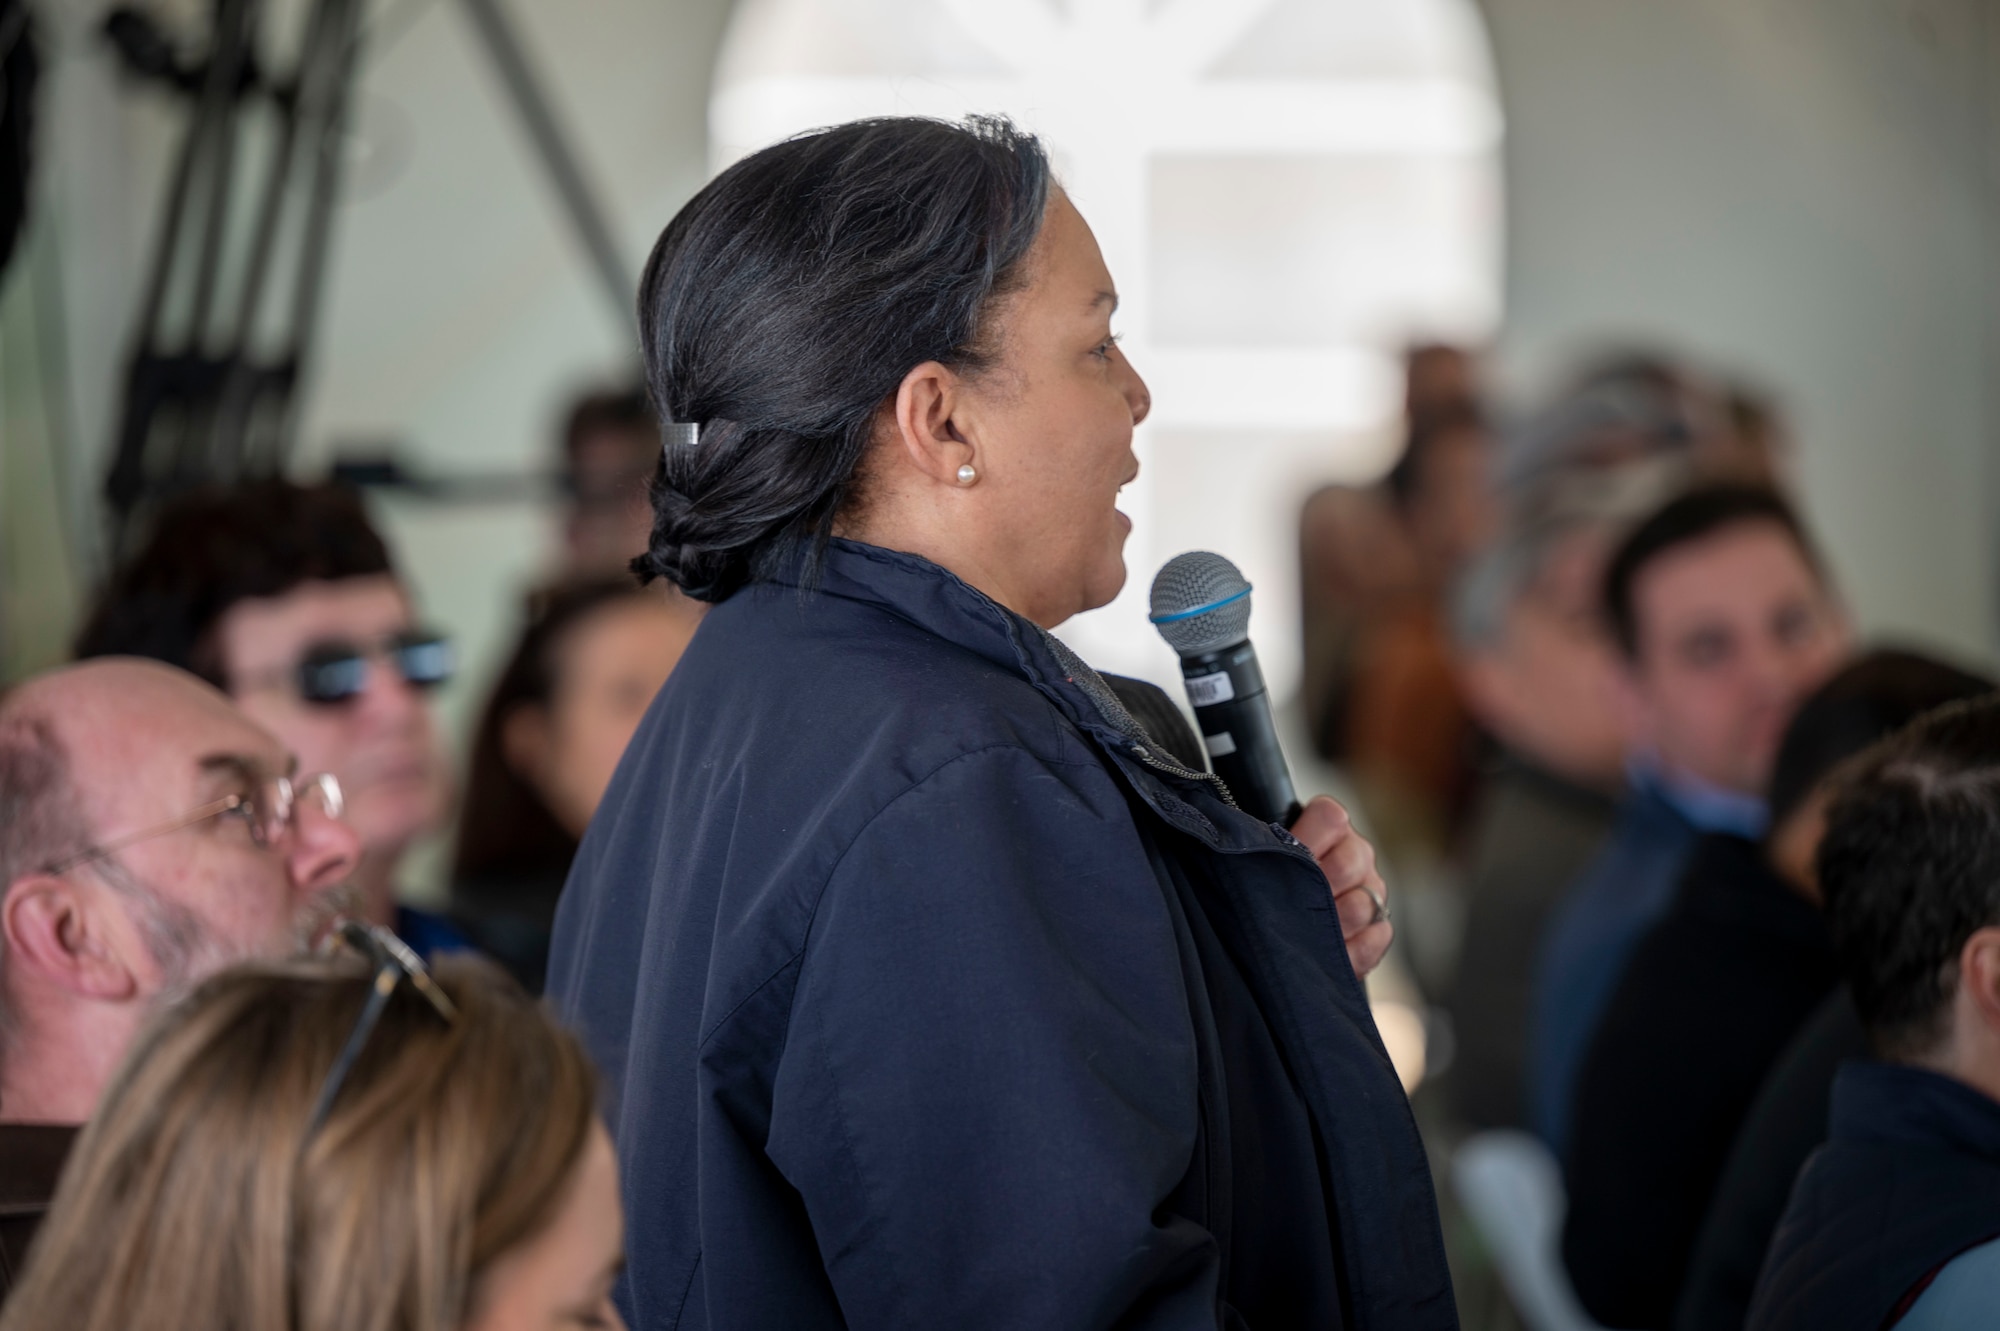 An Edwards Solar Enhanced Use Lease Project ribbon cutting ceremony attendee speaks about the cooperation between the contractors, U.S. Air Force, and local tribal nations to protect Native American cultural sites.